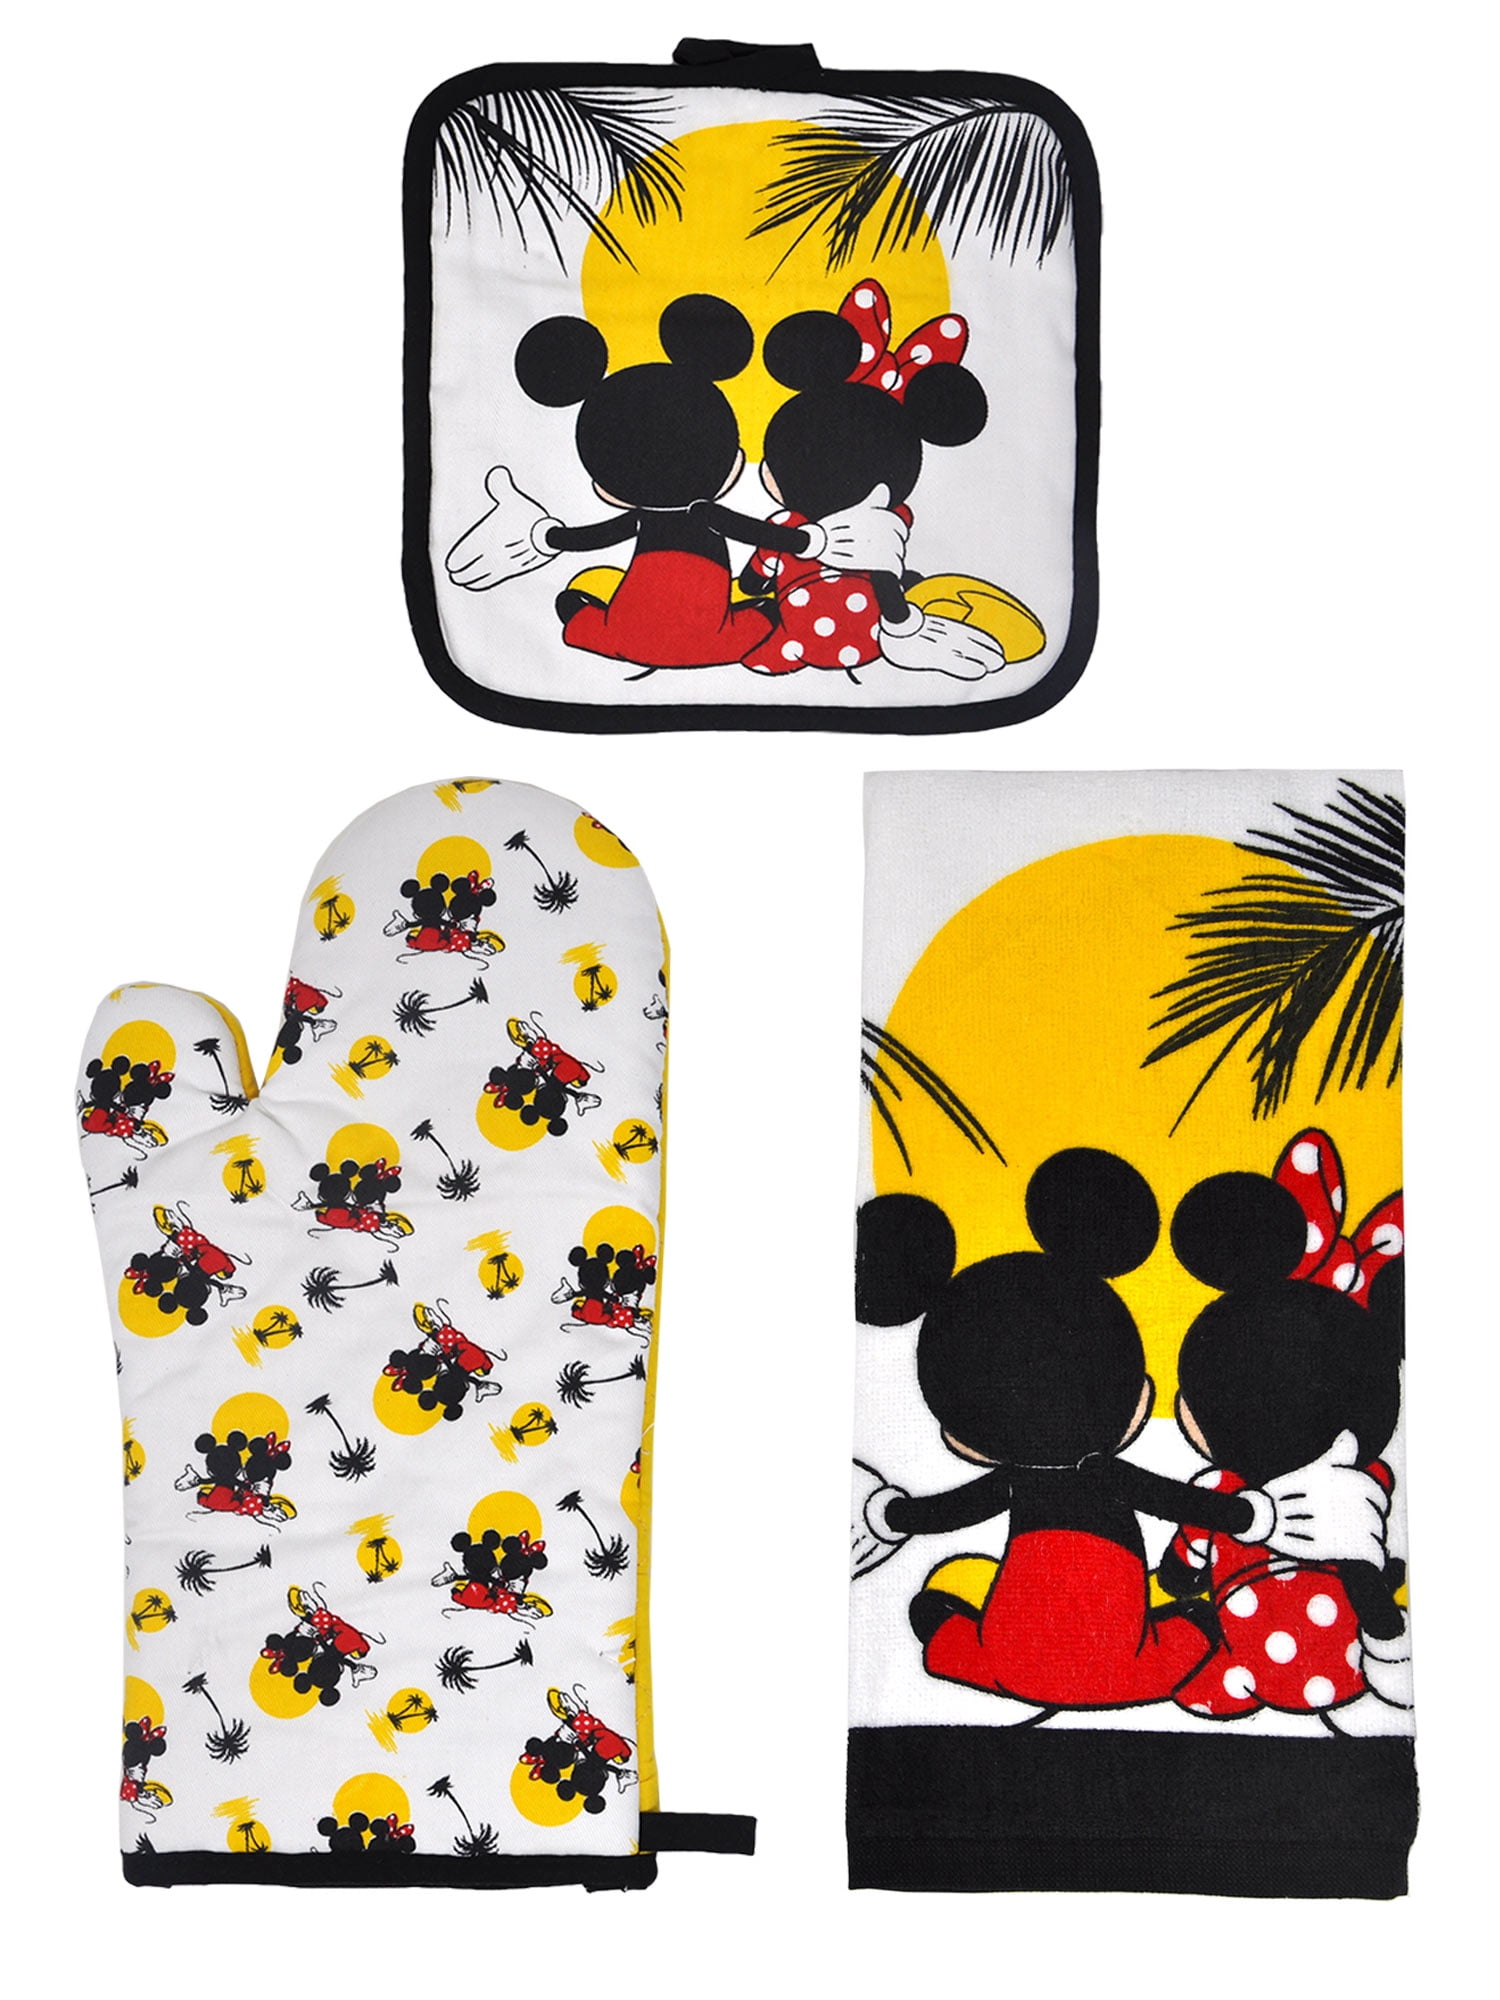 2pcs/set Disney Mickey Mouse Oven Mitts Coasters Suit Cute